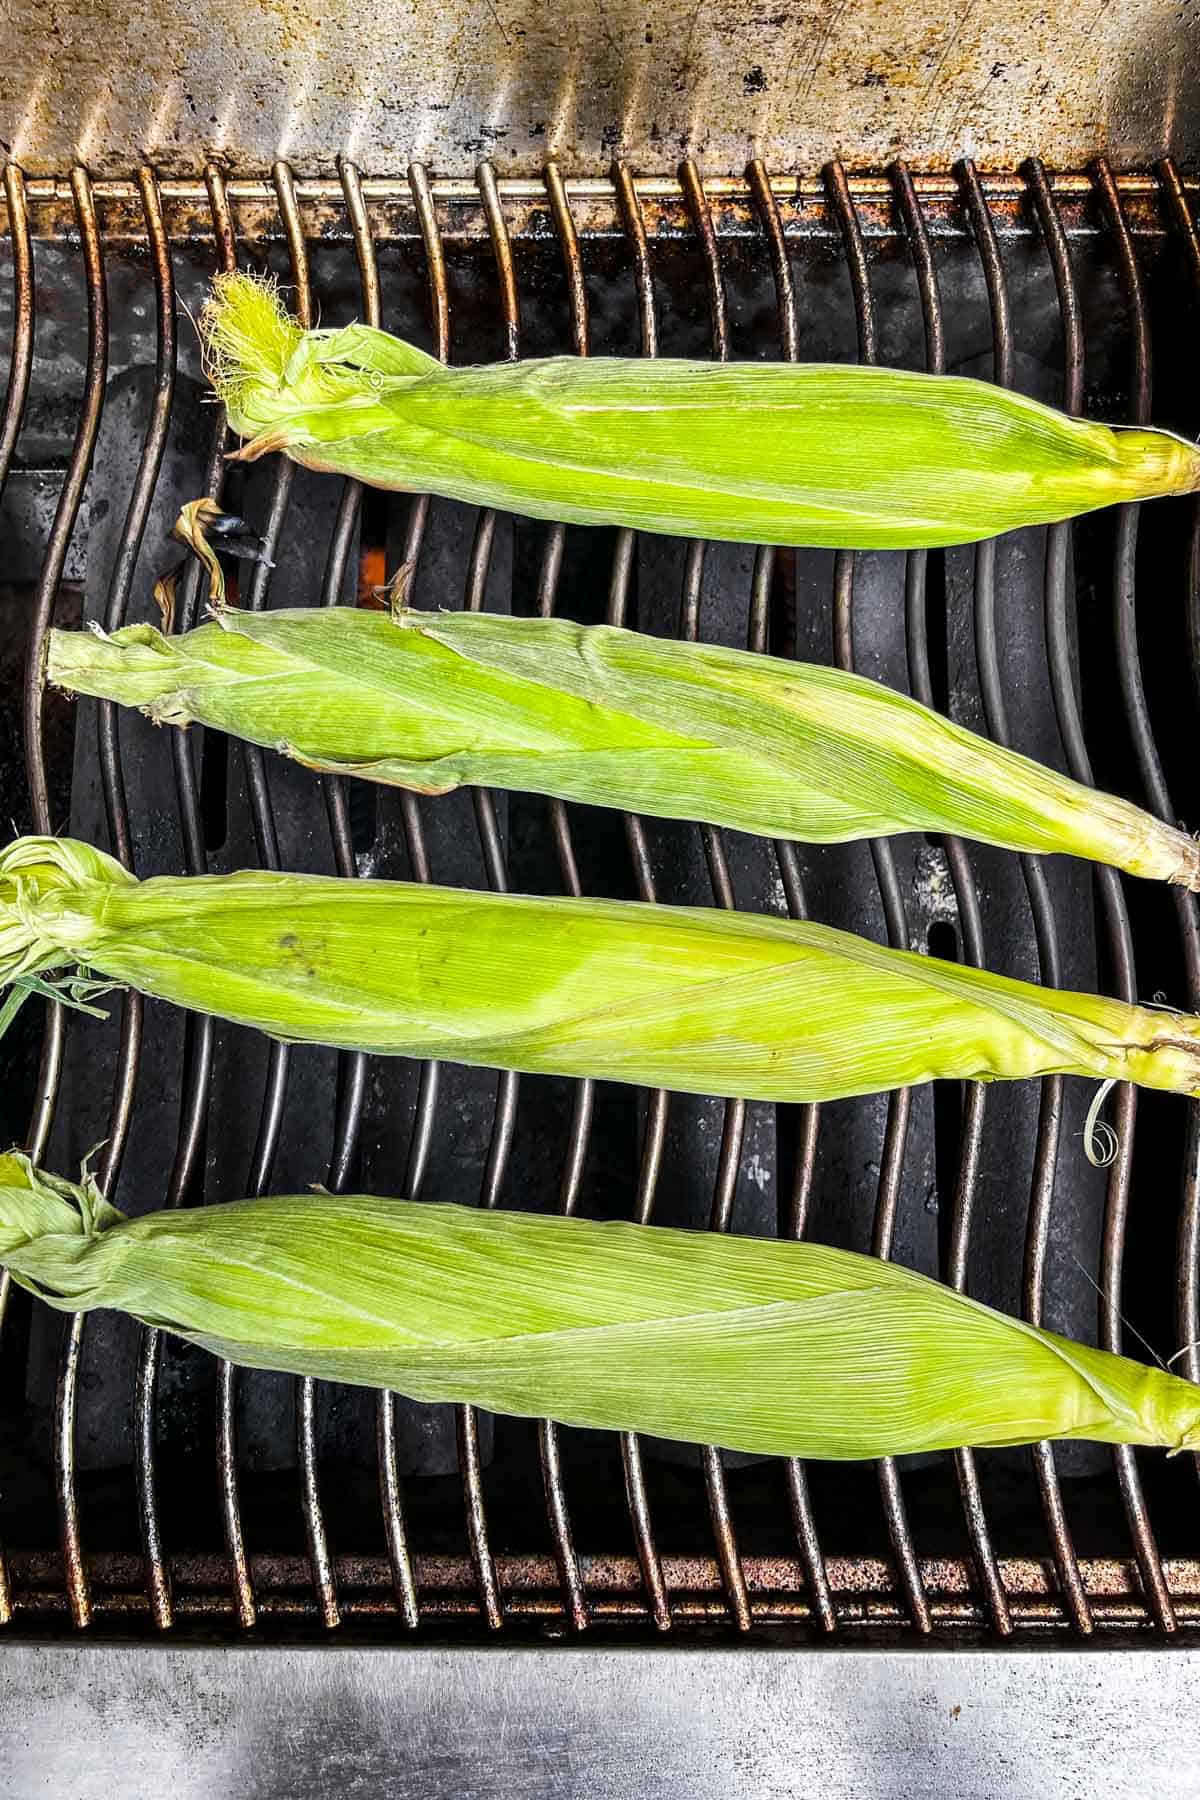 Four pieces of corn with green husks on a grill.